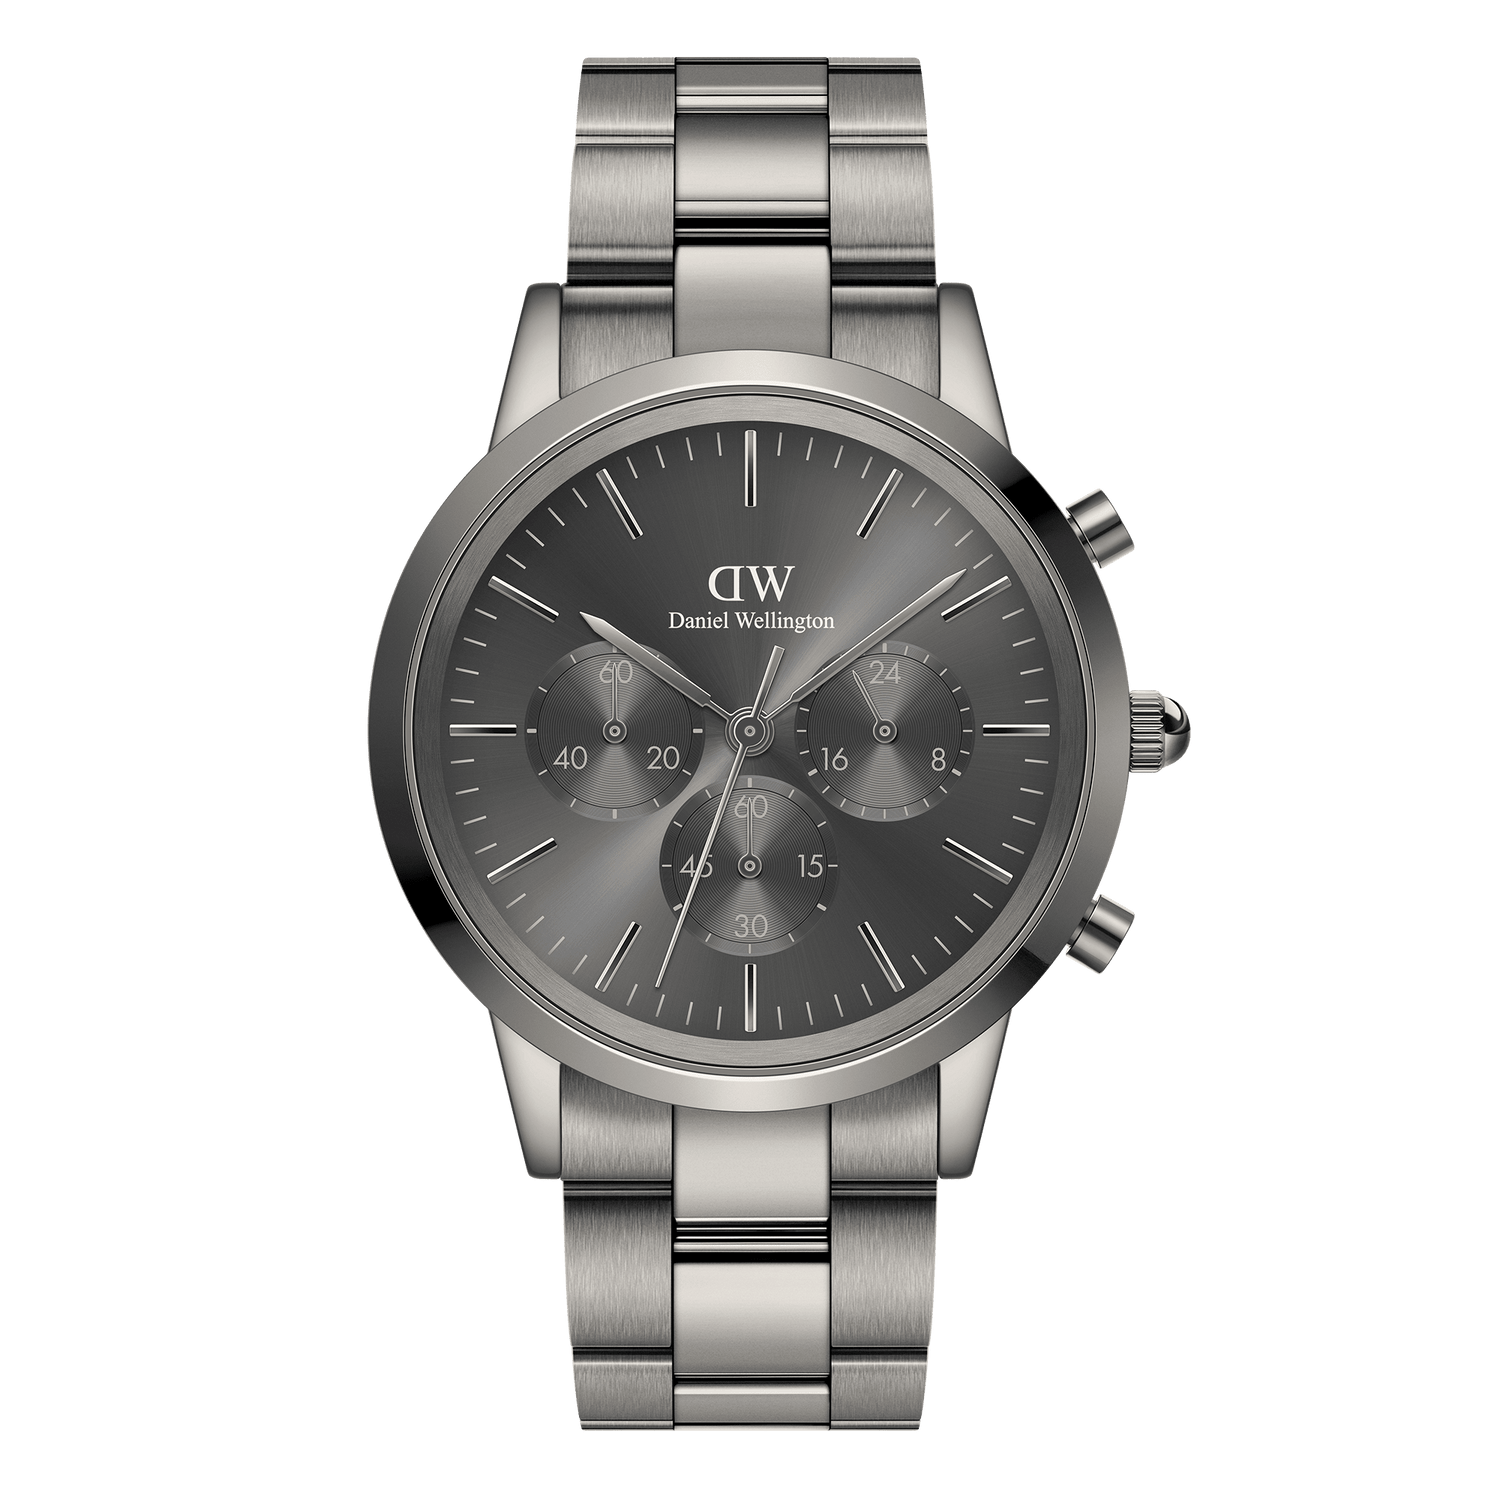 Iconic Chronograph - Chronograph watches for men